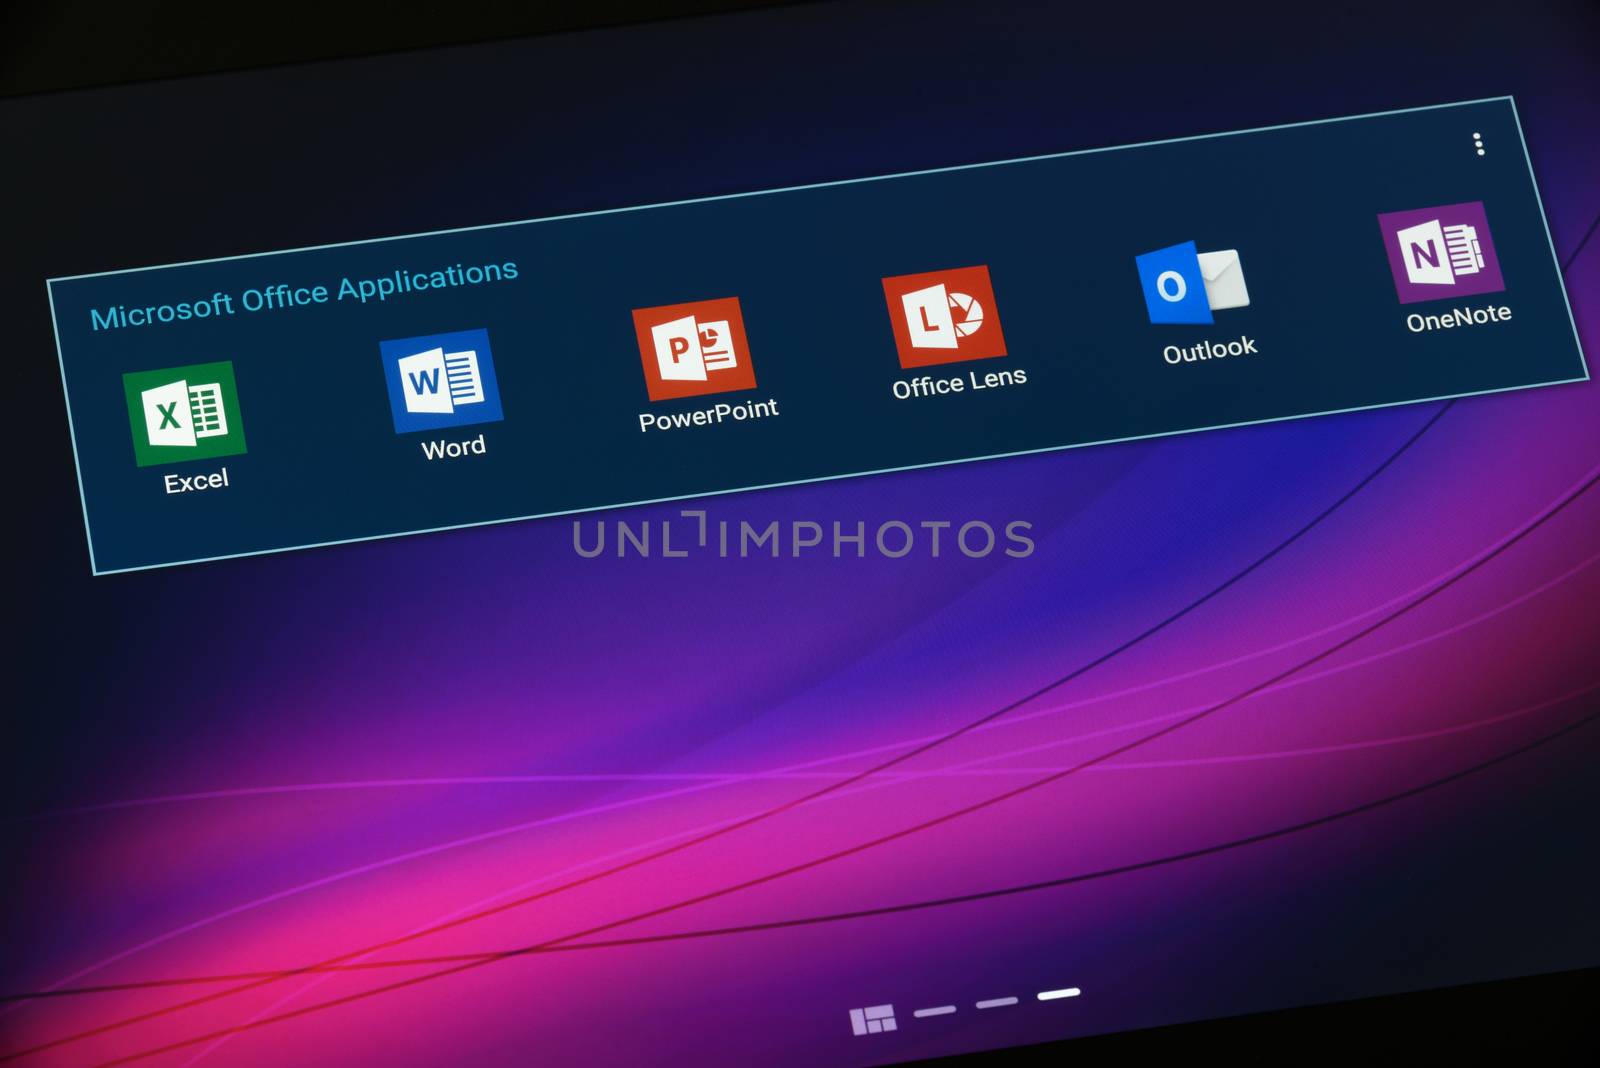 Microsoft Office Applications on Tablet with Android by wdnet_studio